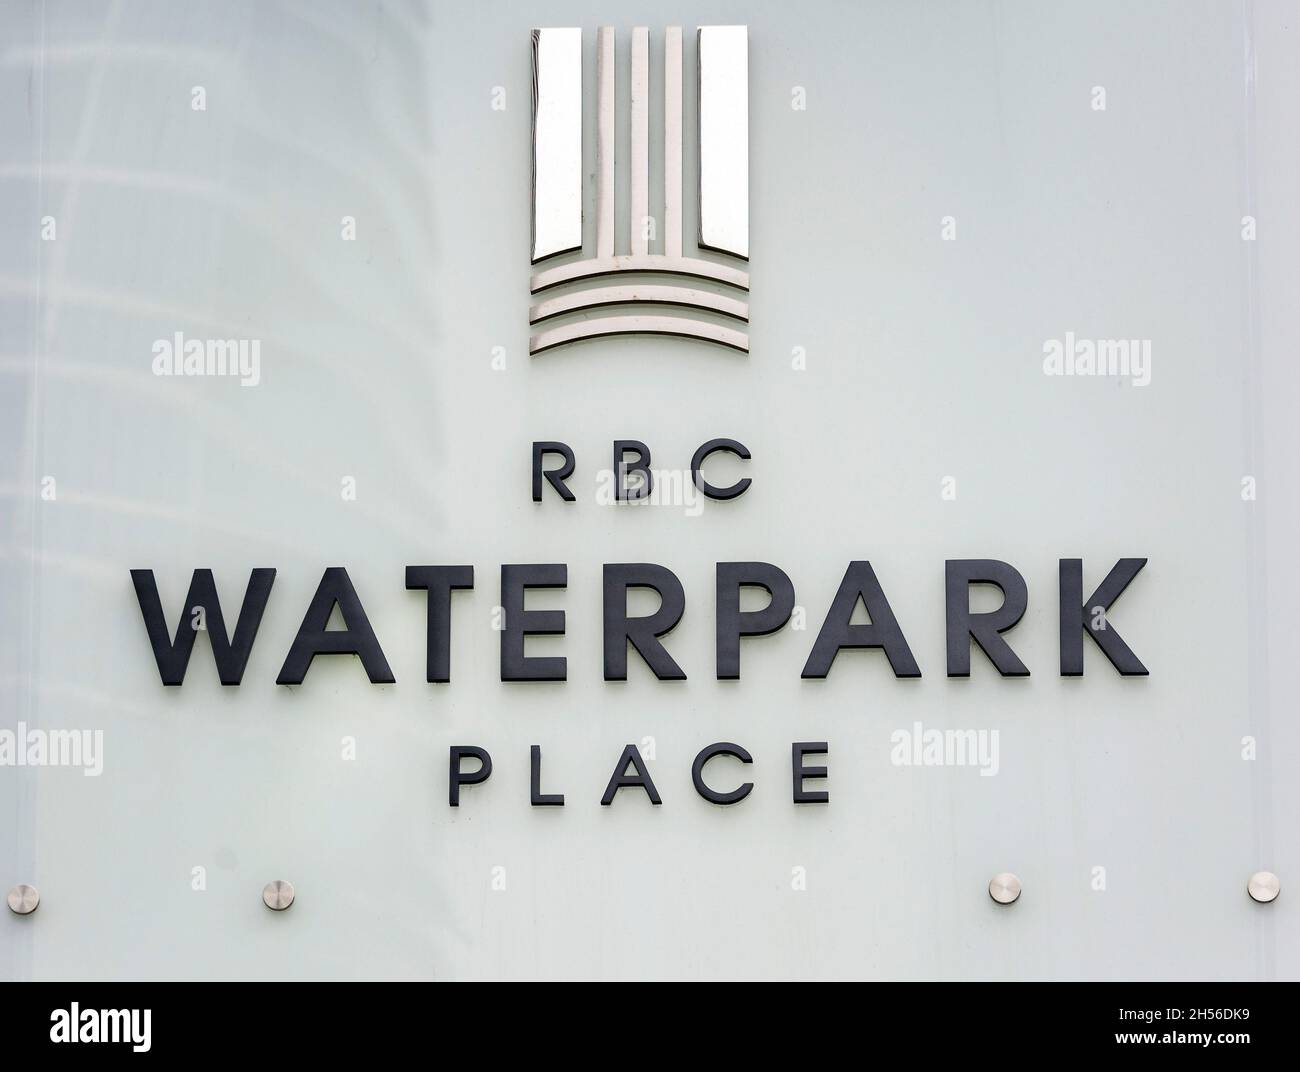 Sign for the Royal Bank of Canada or RBC Waterpark Place in the downtown district of Toronto, Canada. Nov. 6, 2021 Stock Photo